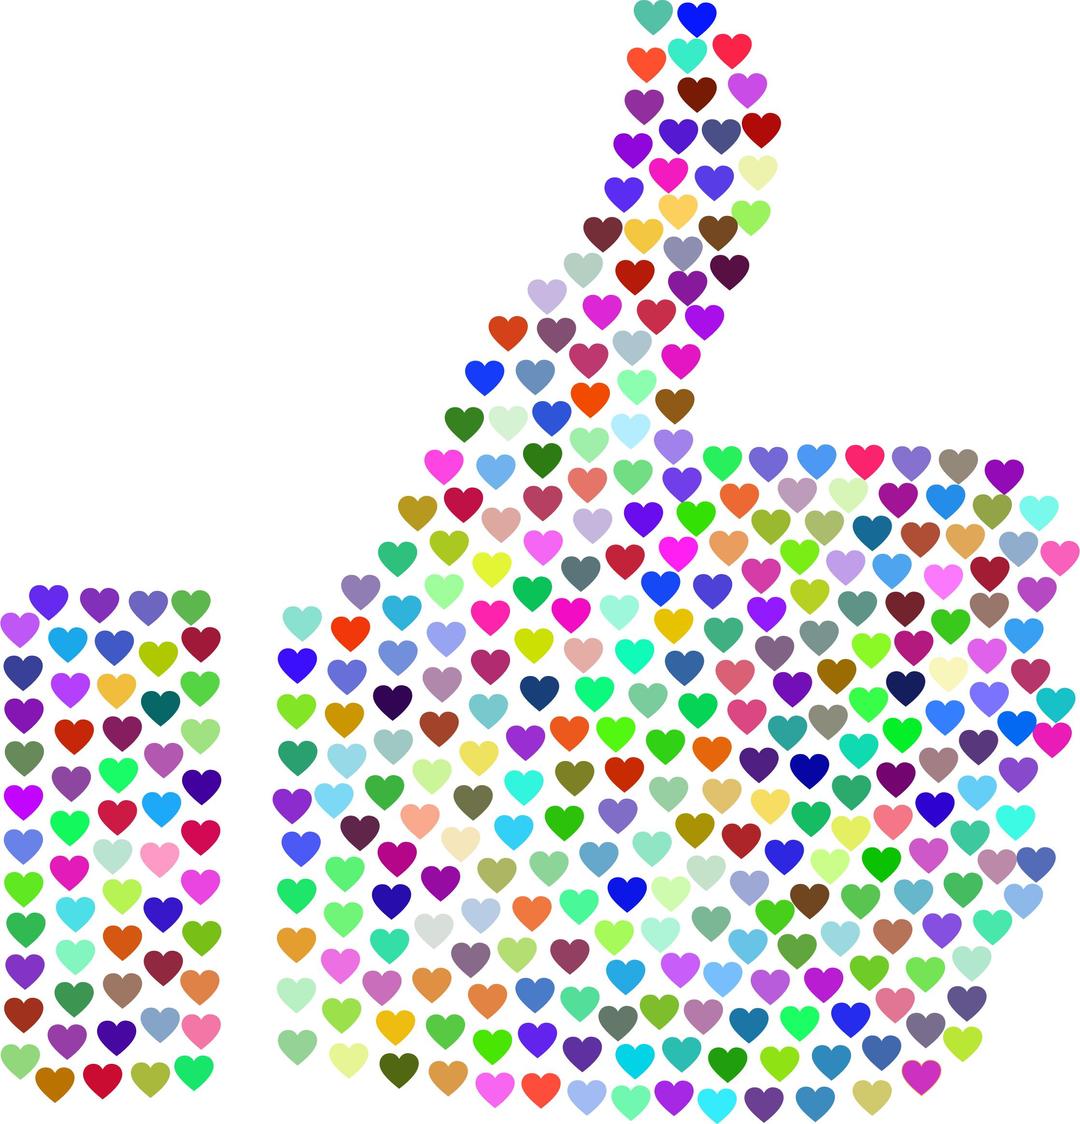 Prismatic Hearts Thumbs Up Silhouette 2 No Background png transparent